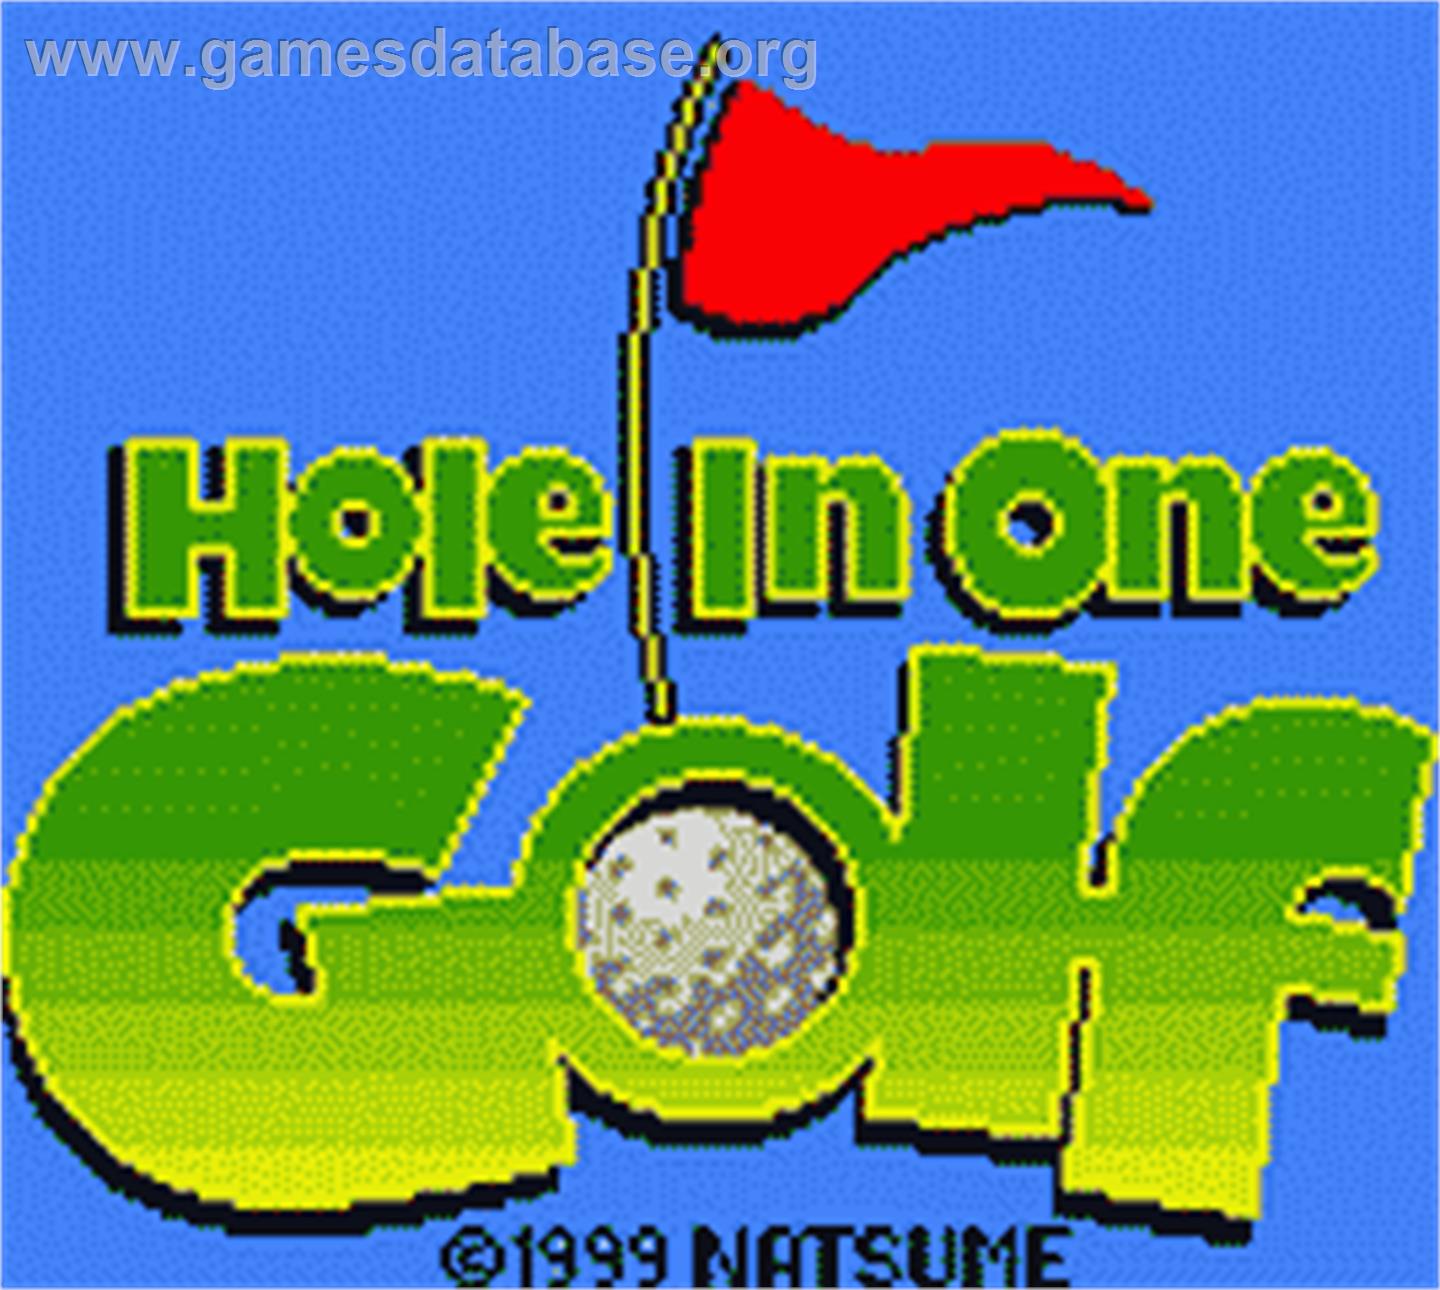 Hole in One Golf - Nintendo Game Boy Color - Artwork - Title Screen